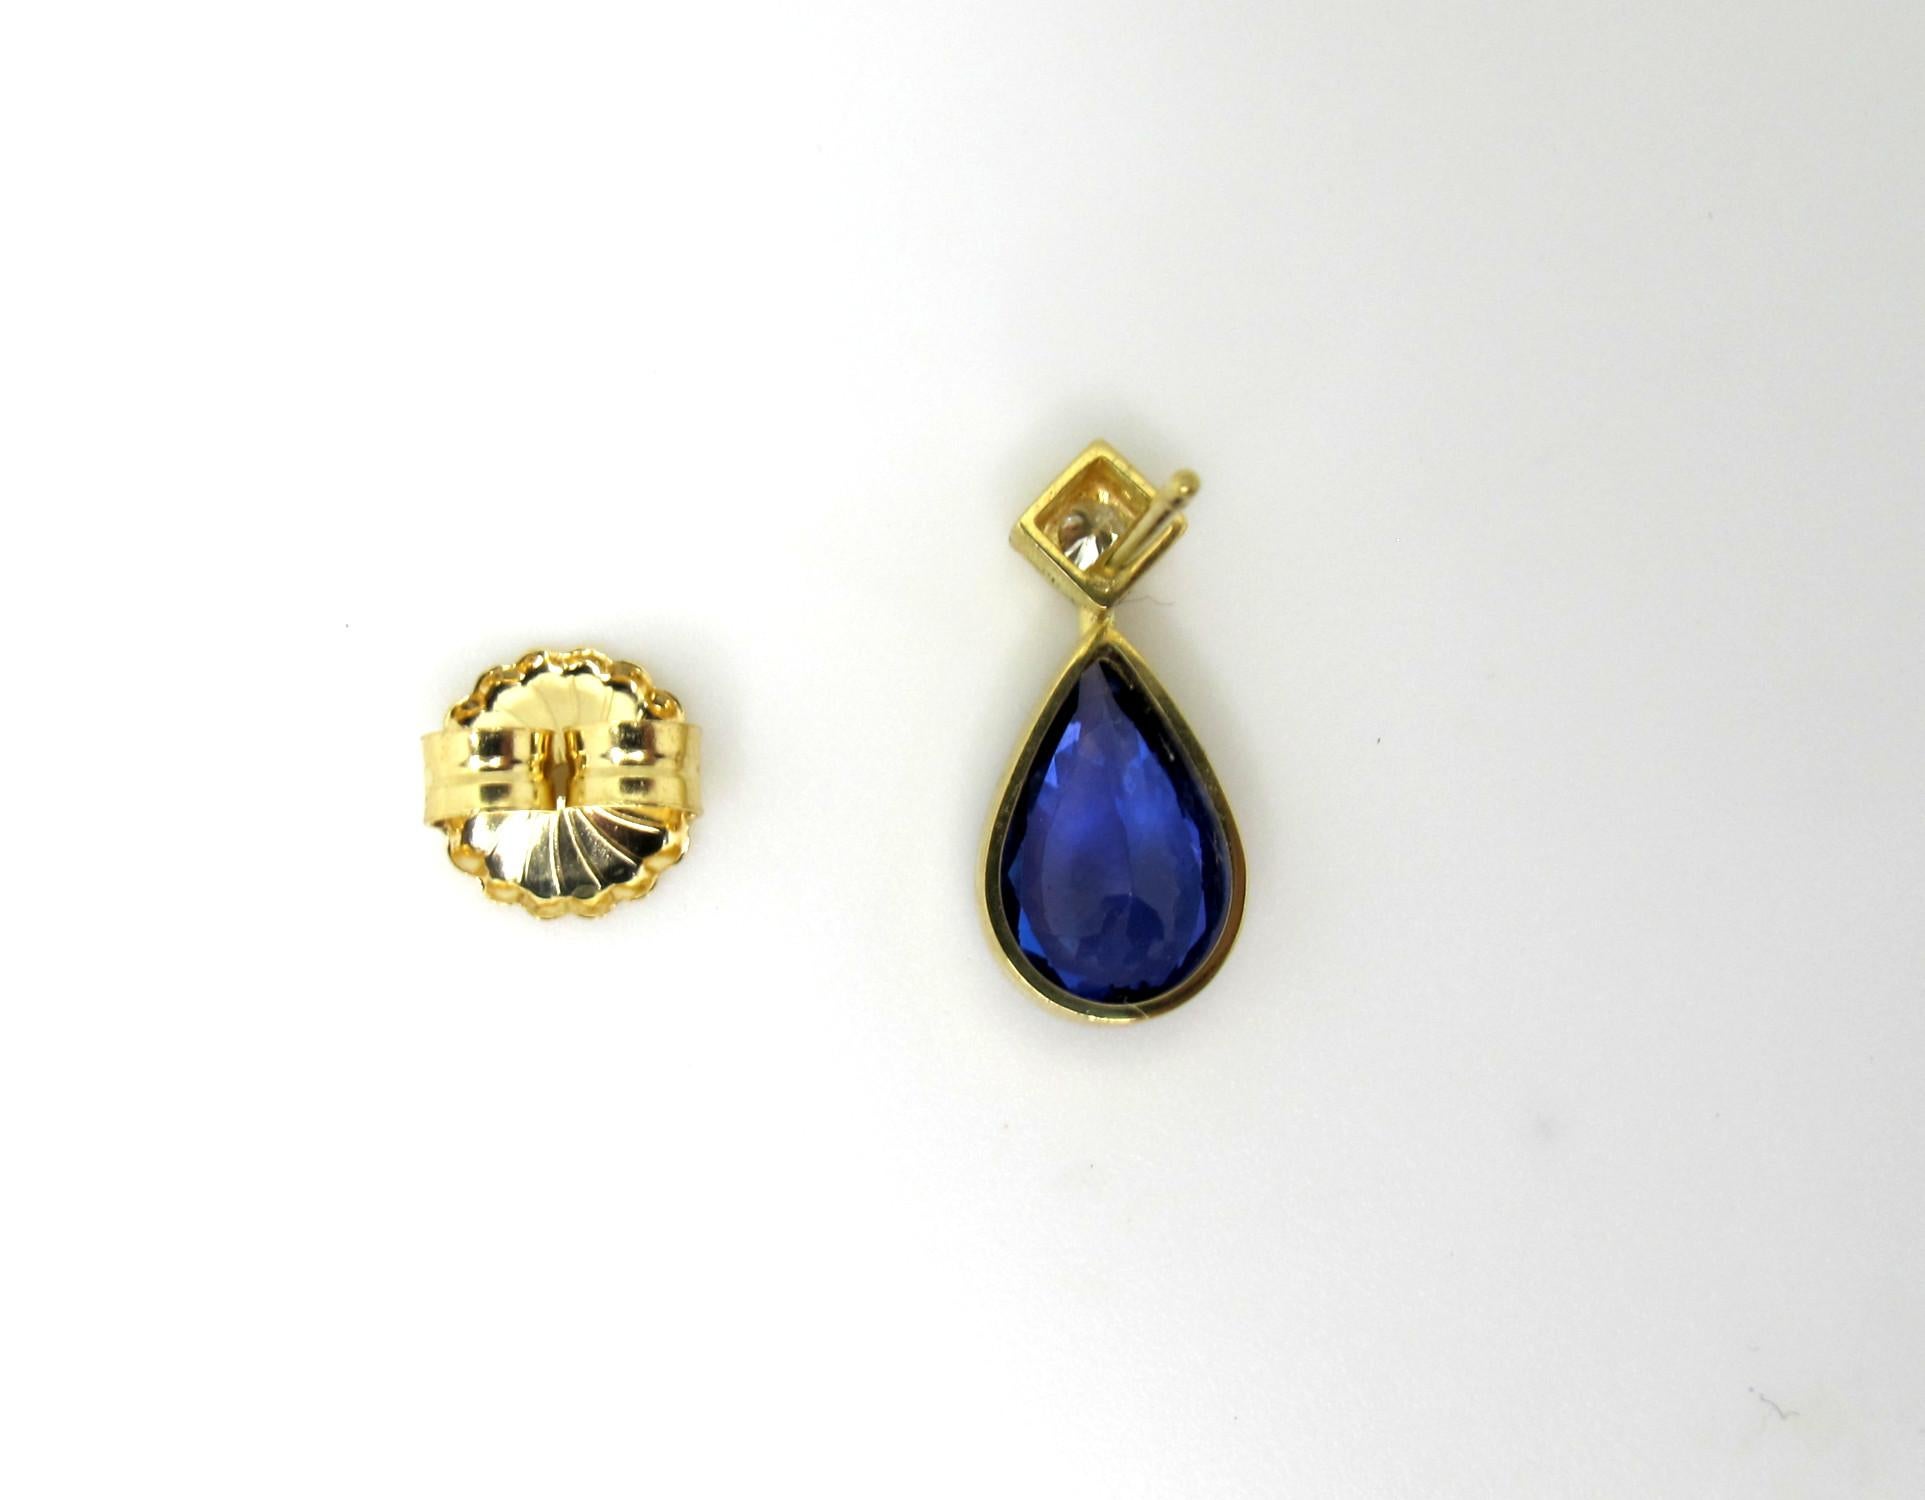 These show-stopping drop earrings feature rich, lavender blue tanzanite pears that have been bezel set in 18k yellow gold and topped with a sparkling diamond! The tanzanites are beautifully matched, breathtaking in color, and extremely